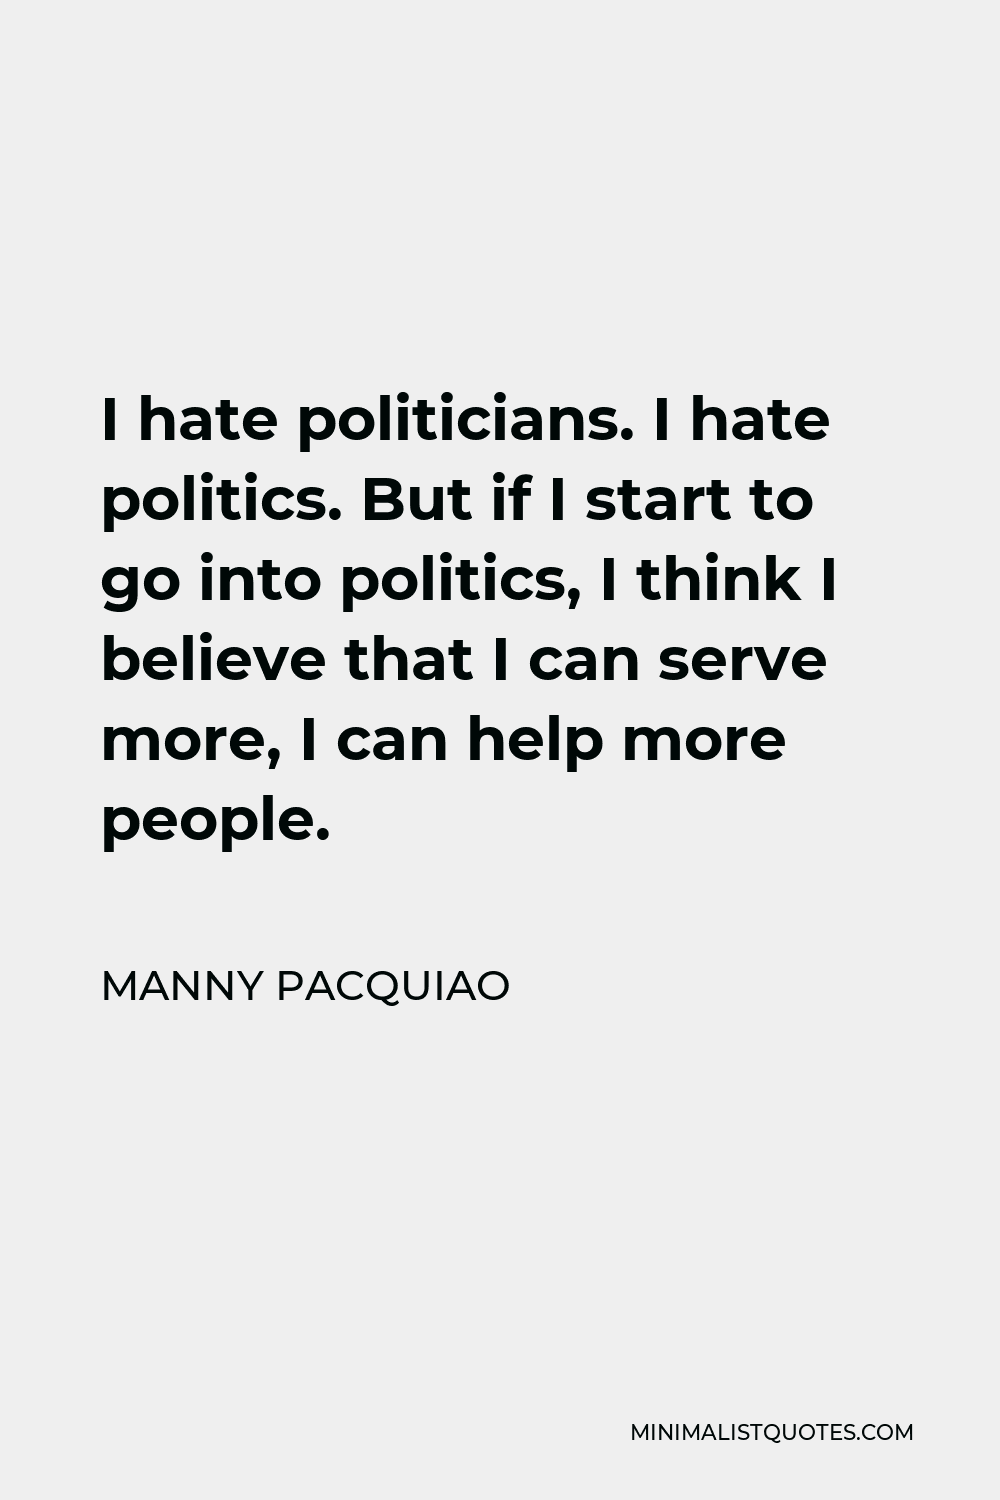 Manny Pacquiao Quote - I hate politicians. I hate politics. But if I start to go into politics, I think I believe that I can serve more, I can help more people.